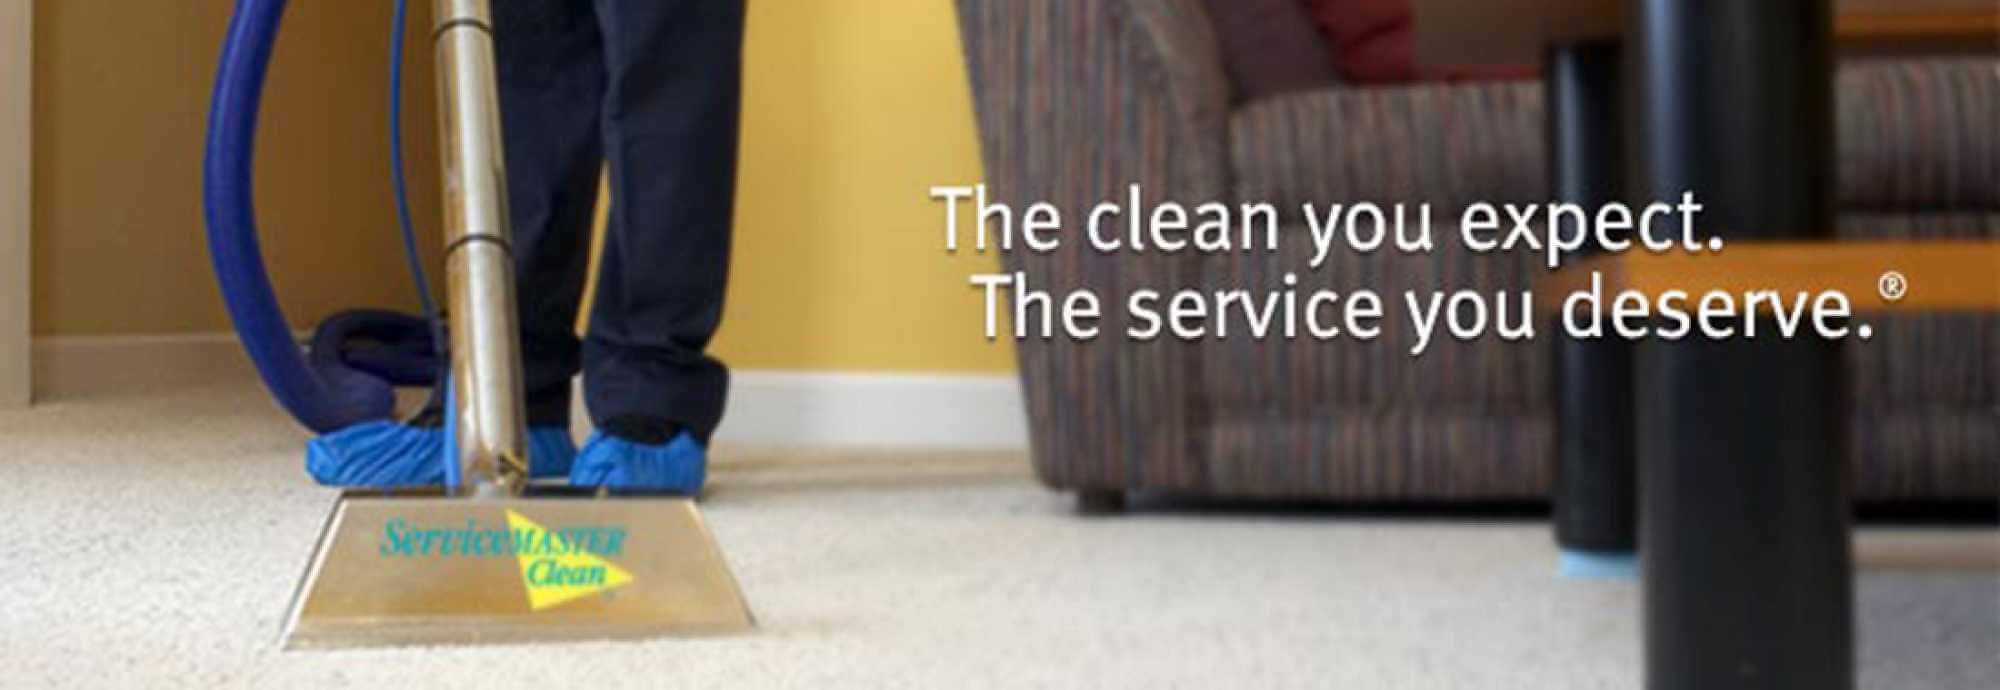 ServiceMaster Clean of Naples FL